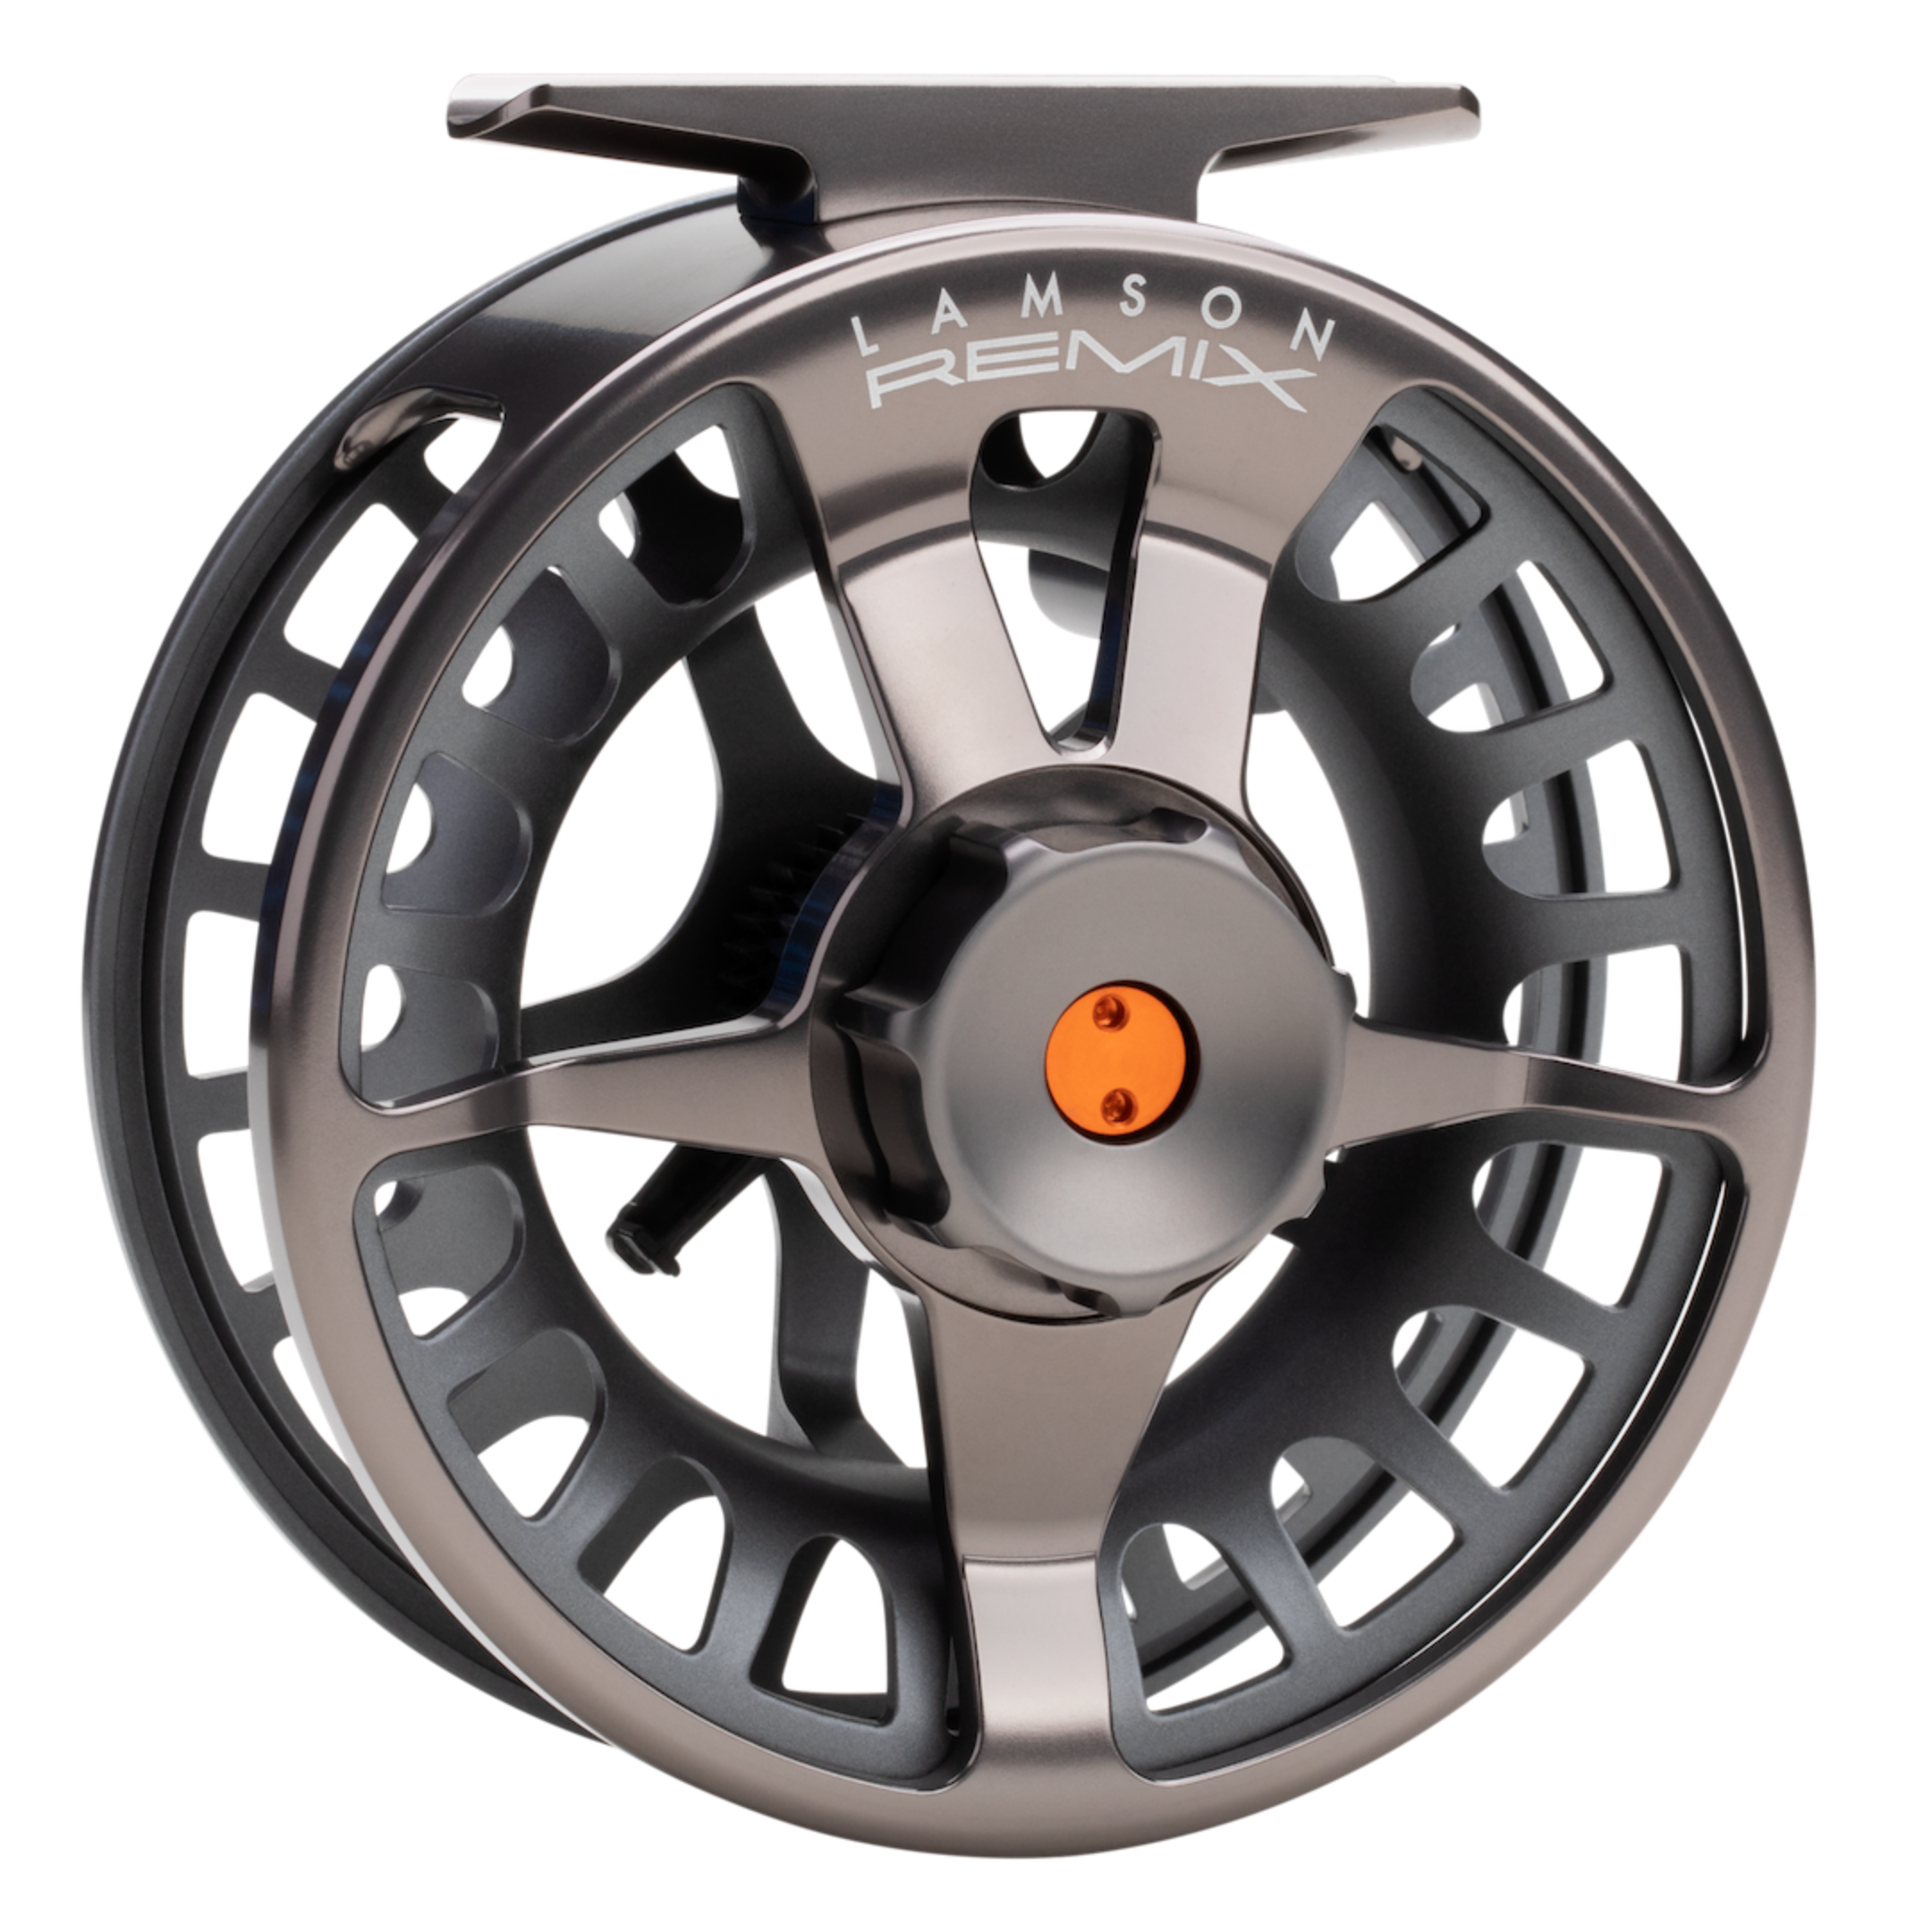 Lamson Remix Fly Reel  Waterworks Lamson – Fly and Field Outfitters